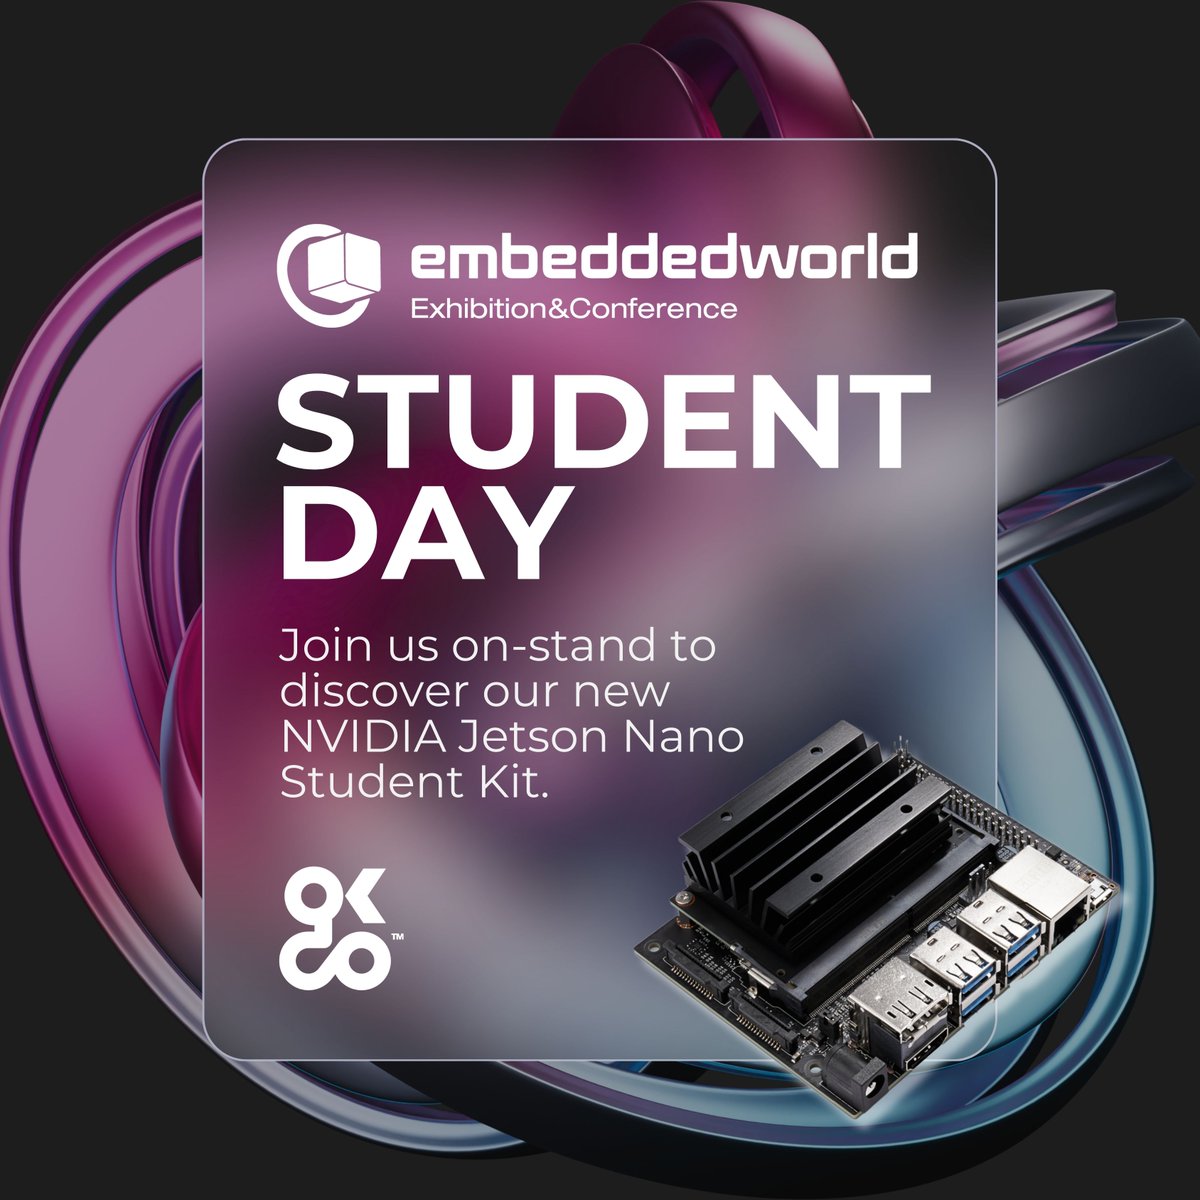 Final day at #EmbeddedWorld! We're excited to showcase our new @NVIDIA Jetson Nano Student Kit at stand 3A-415. It's Student Day, so come by and discover the future of AI and edge computing with us! #LetsOKdo #EW24 #NVIDIA #NVIDIAJetsonNano #StudentDay